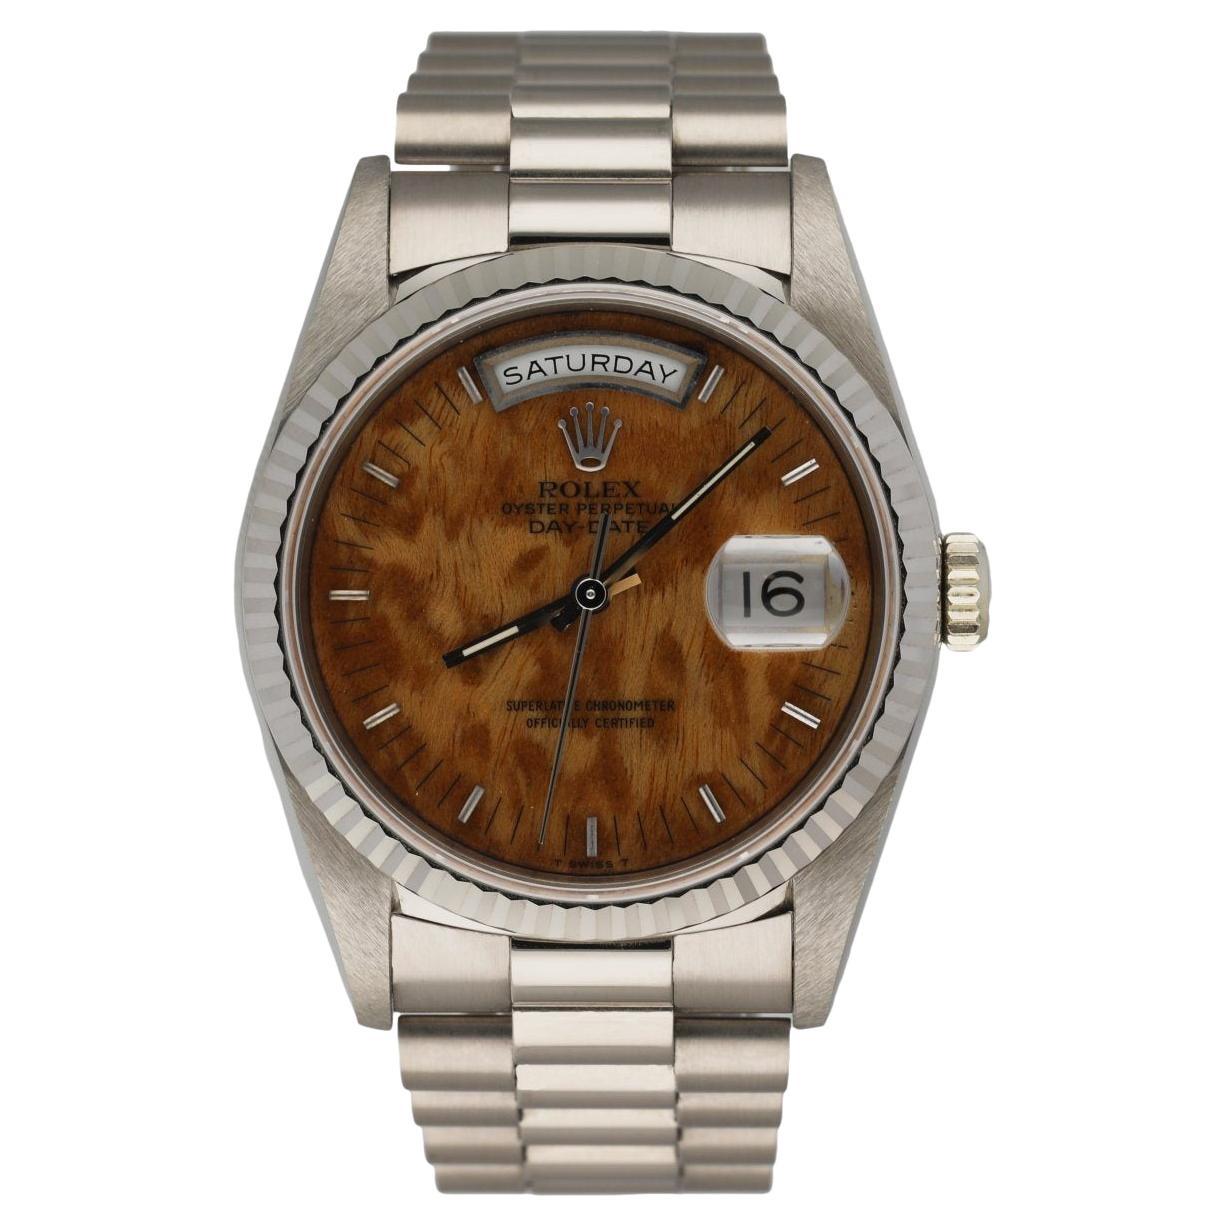 Rolex Day Date 18239 18K White Gold Wood Dial Men's Watch Mint